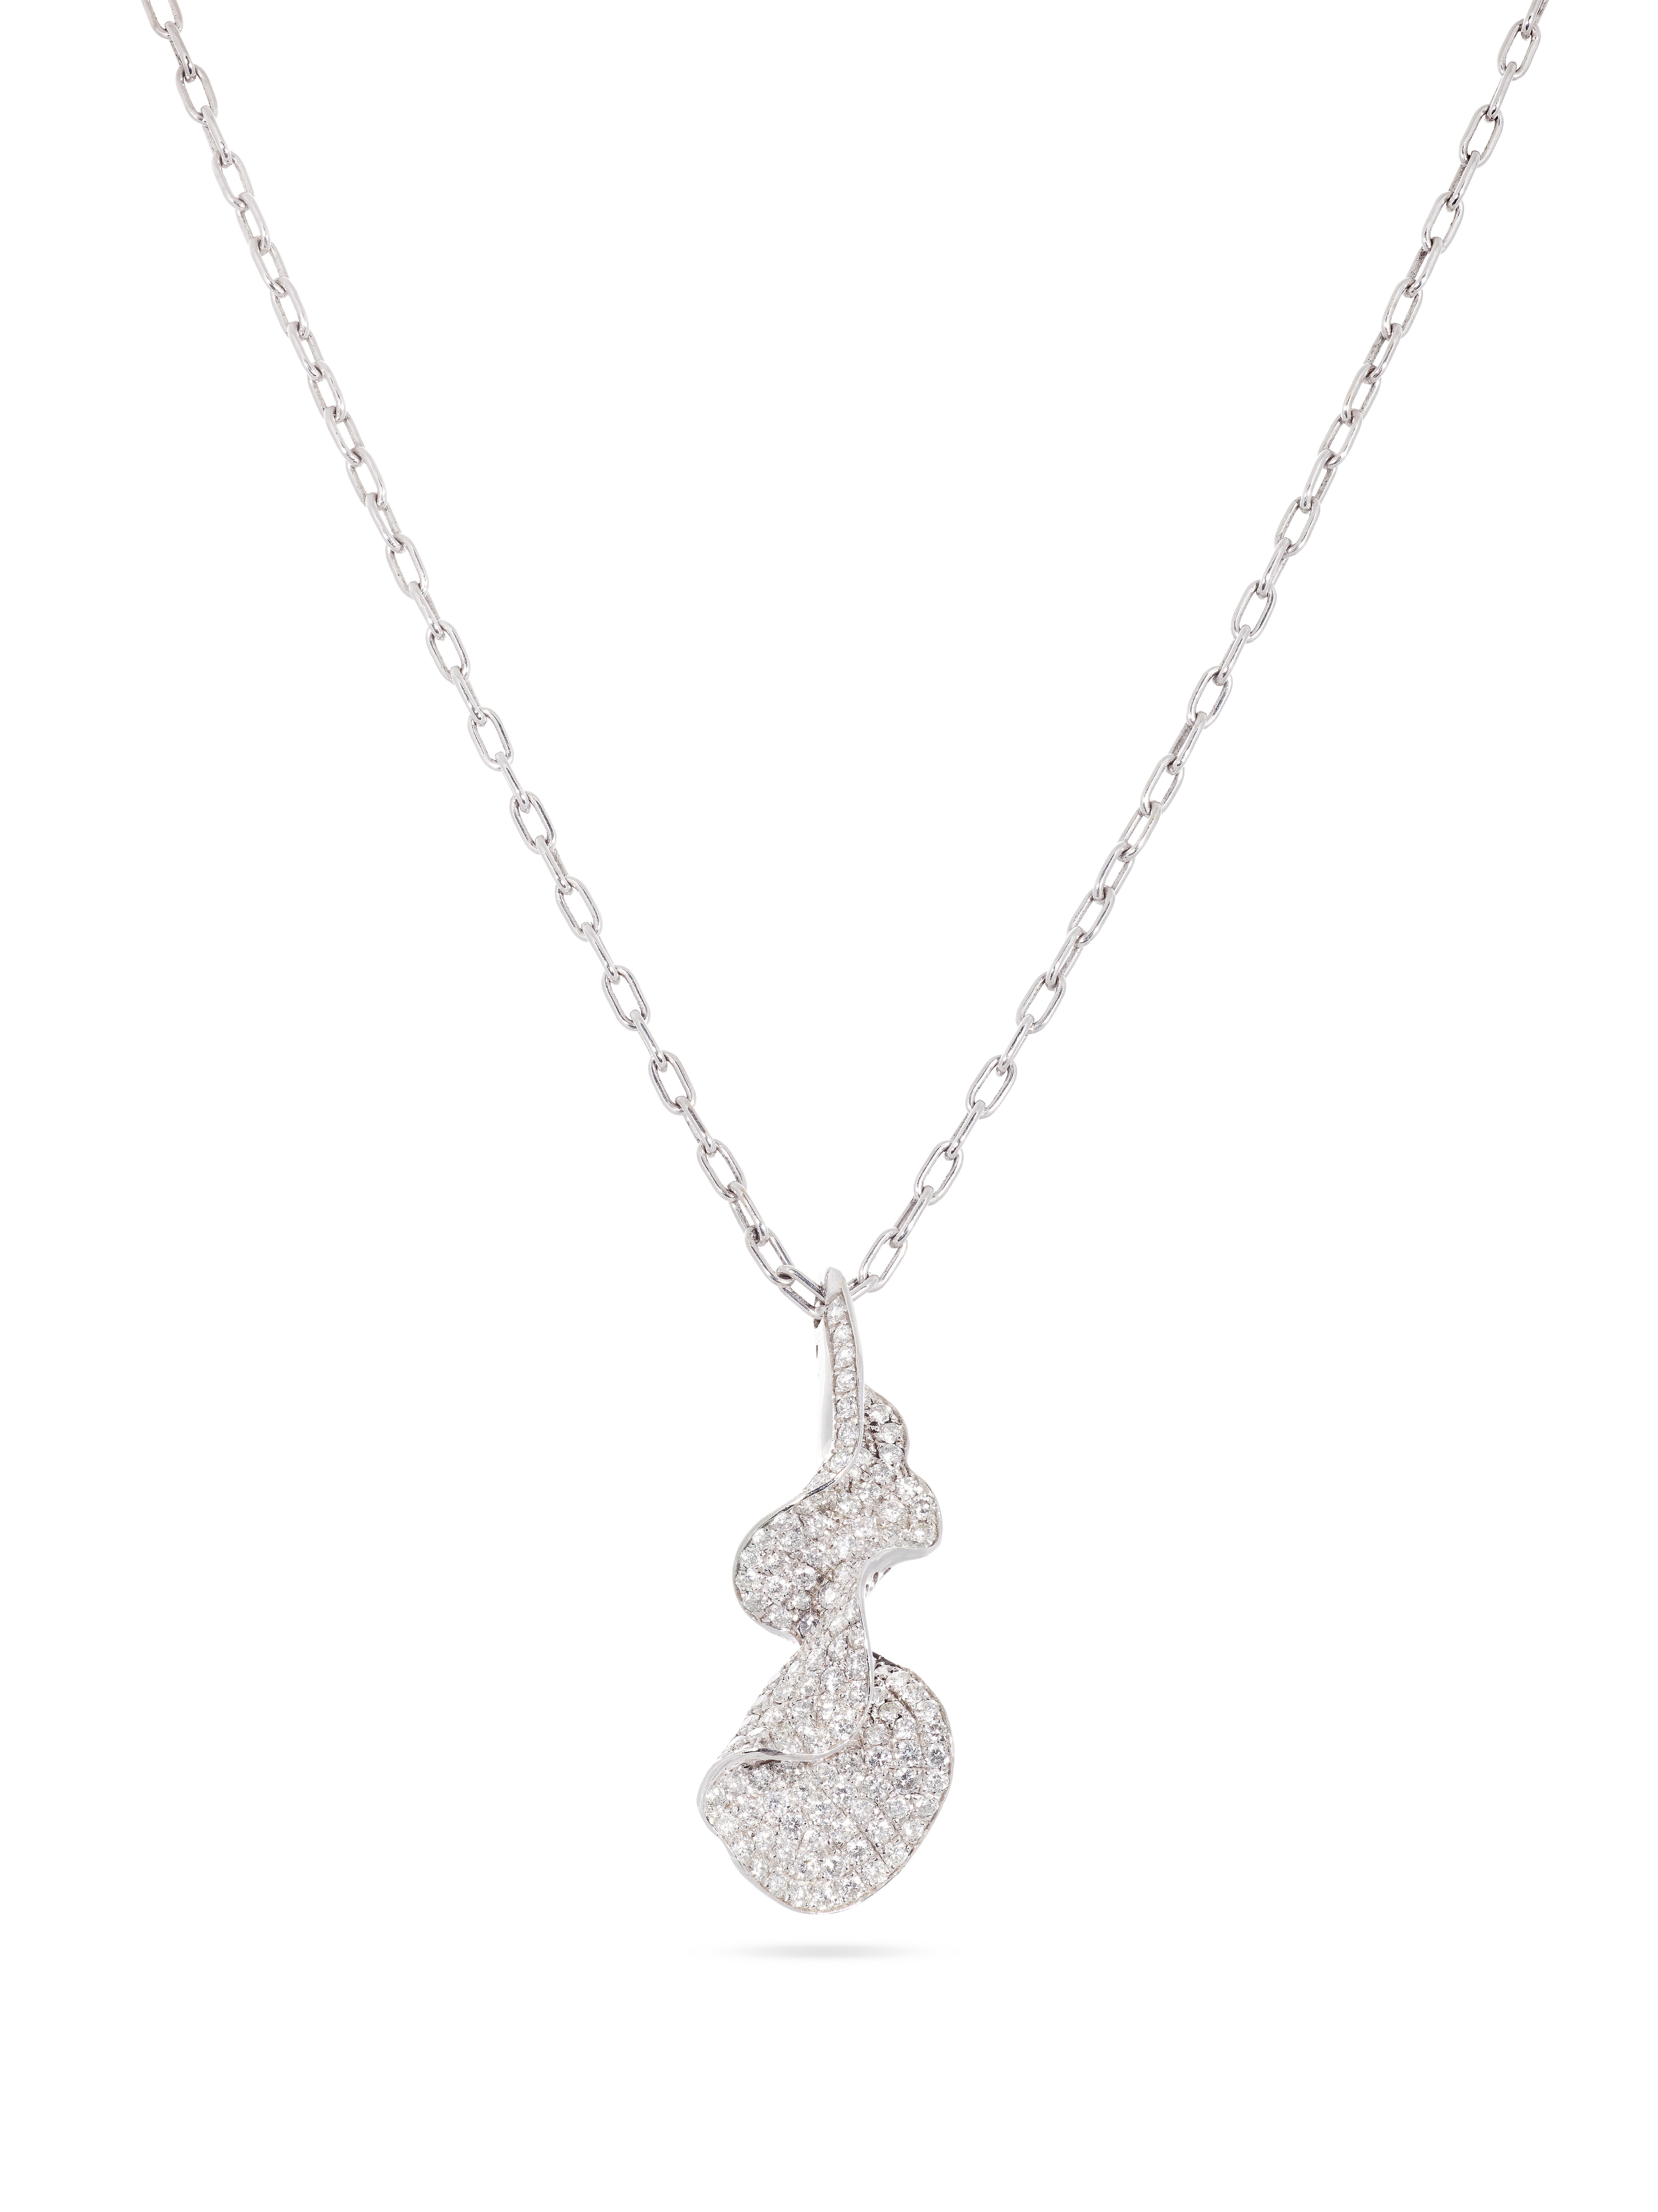 Rosior one-off Contemporary Pendant Necklace set in White Gold with 142 F color, VVS clarity Diamonds with total weight of 2,50 ct.
Pendant is 1.57